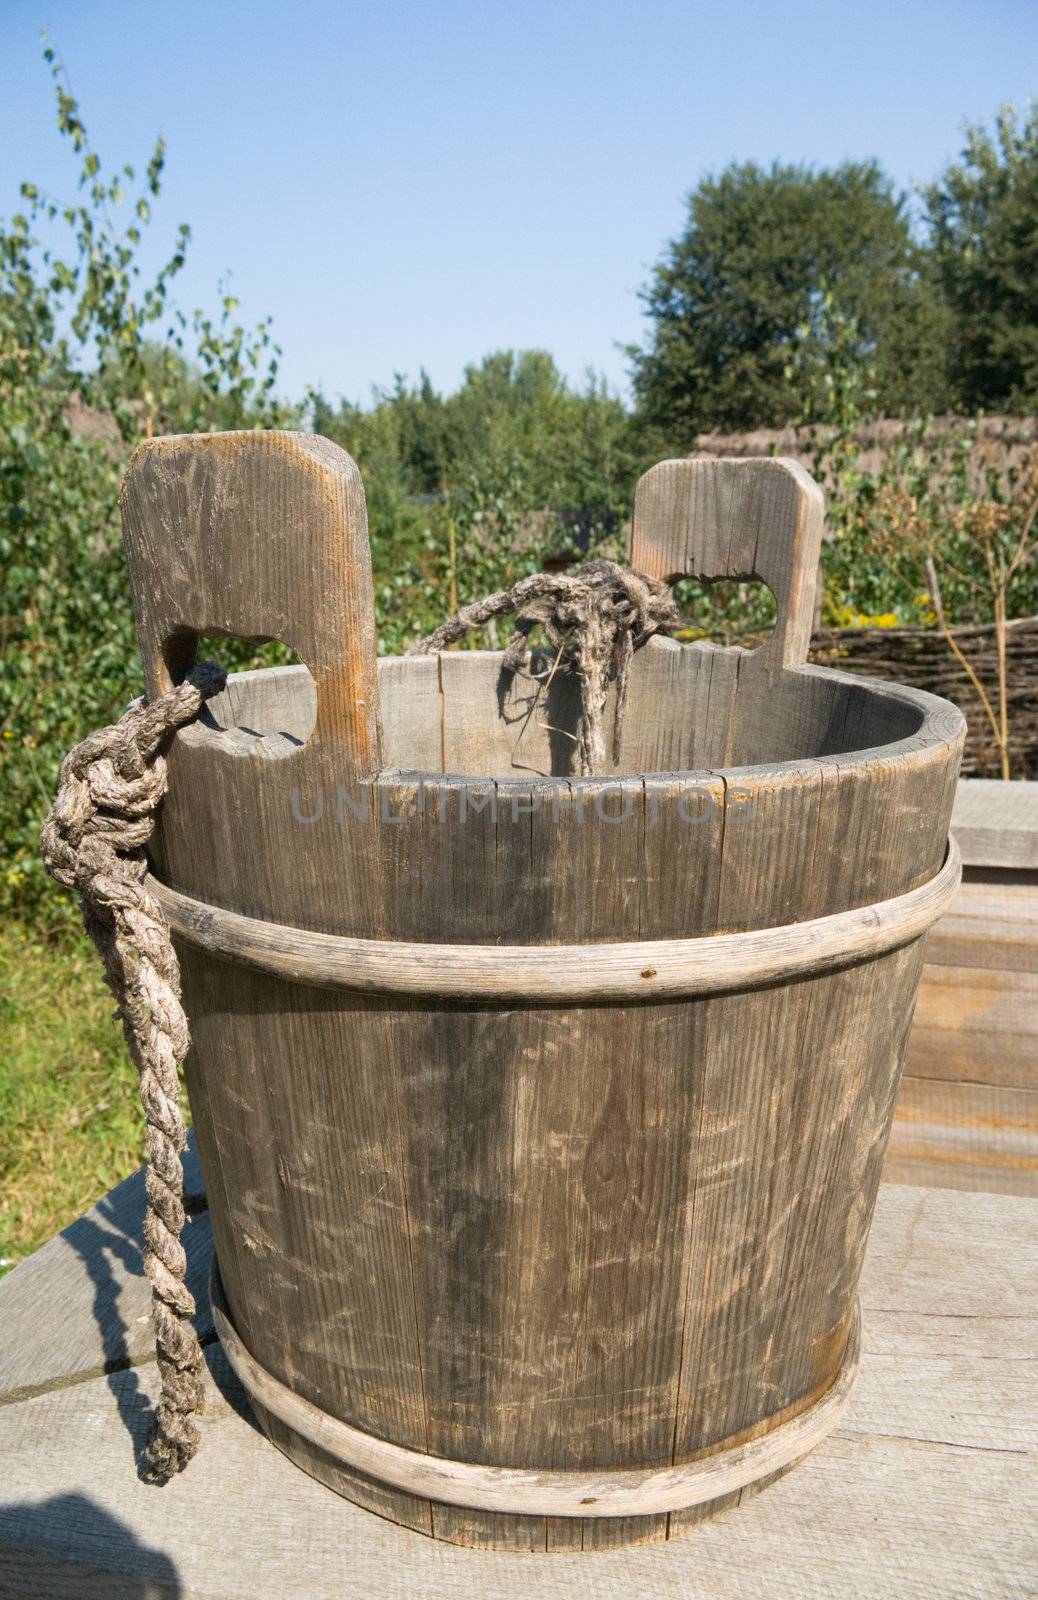 the old wood pail for water